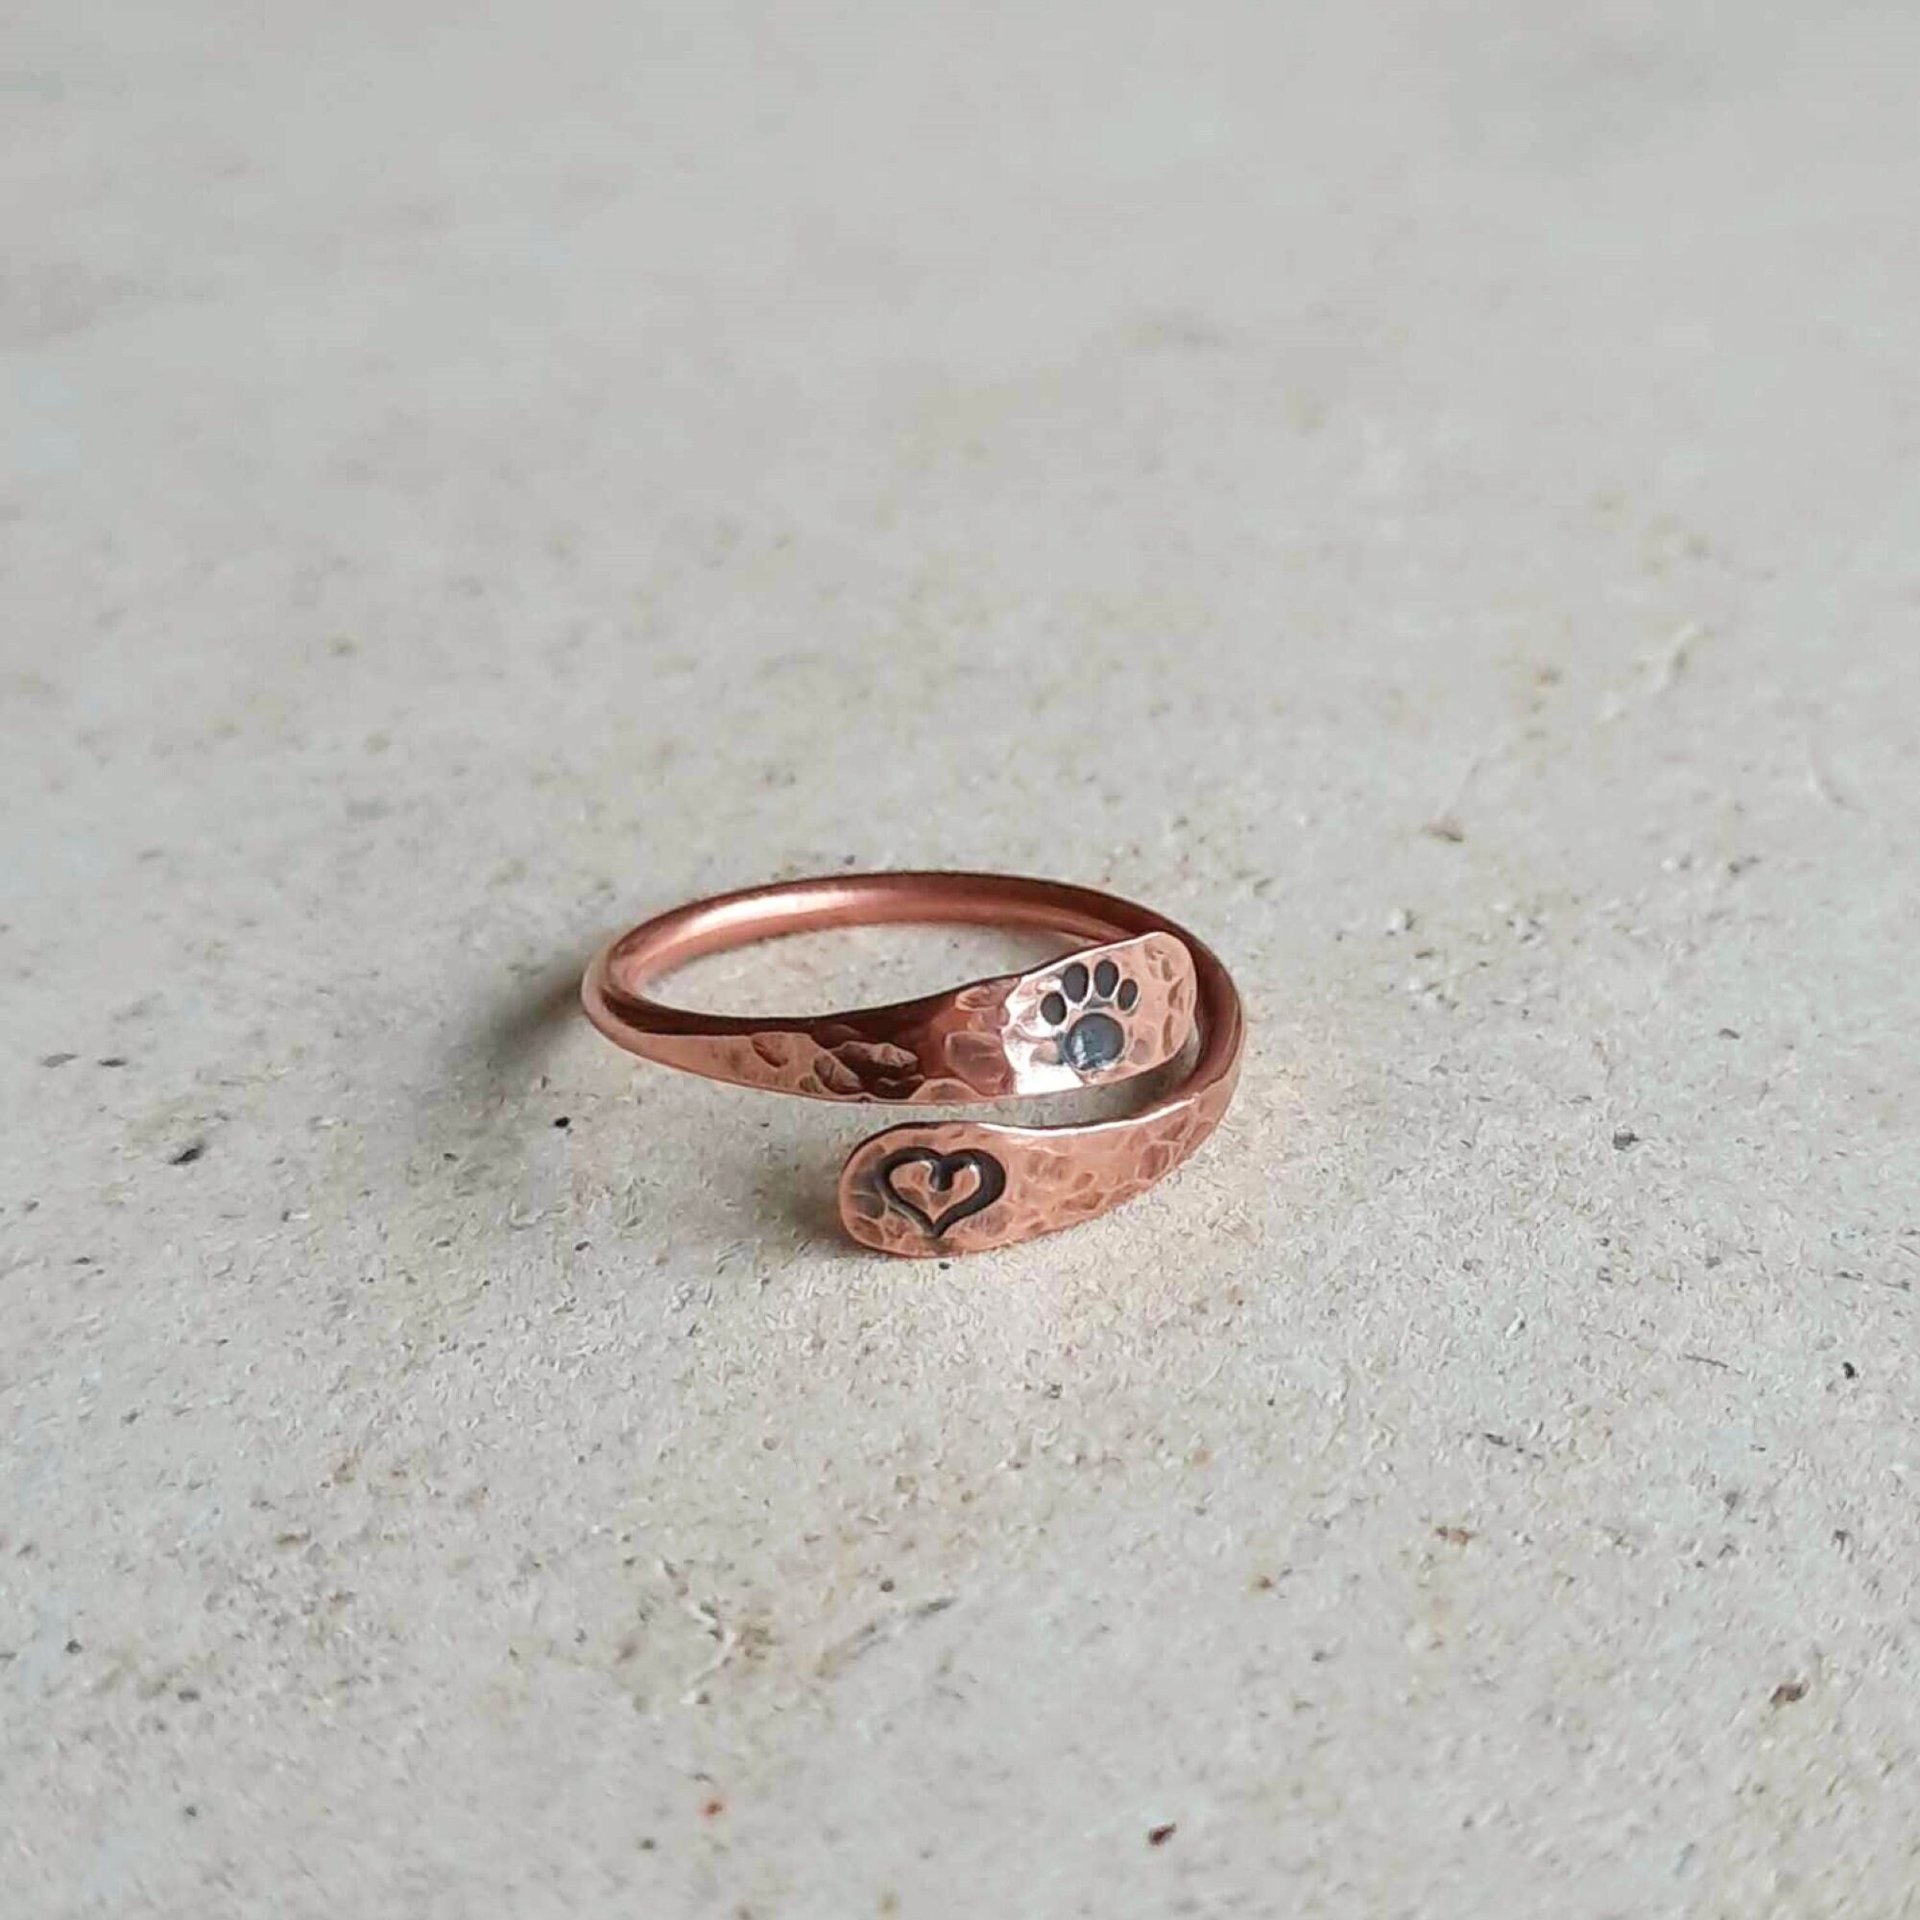 Copper paw print and love heart adjustable wrap around ring, handmade by The Tiny Tree Frog Jewellery